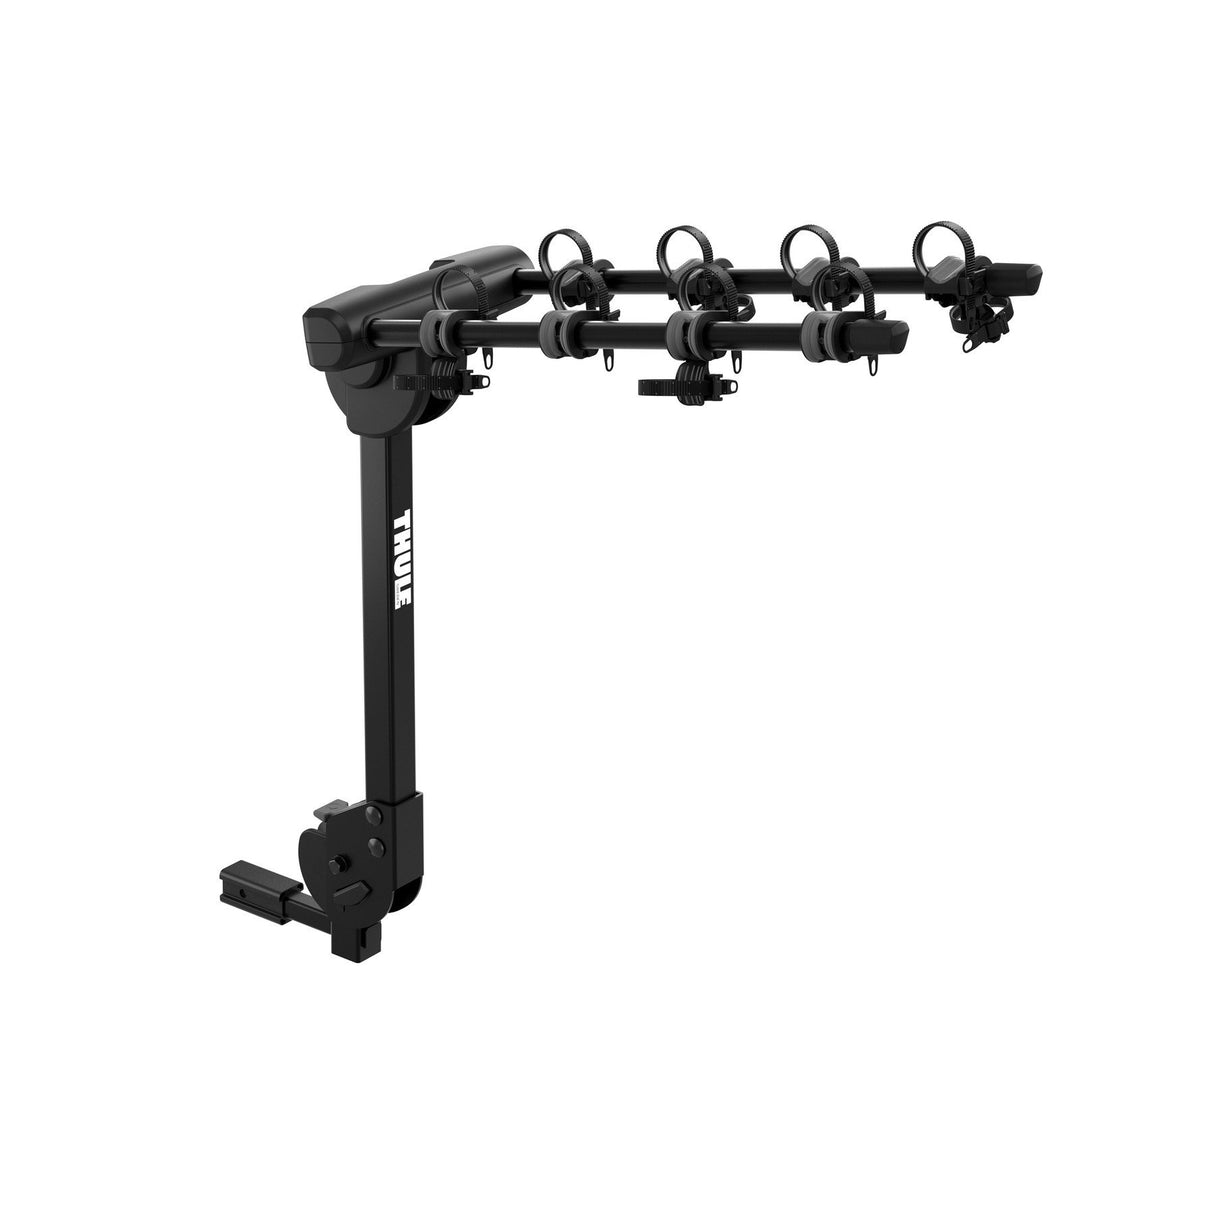 Support d'attelage pour vélo Thule Camber 4